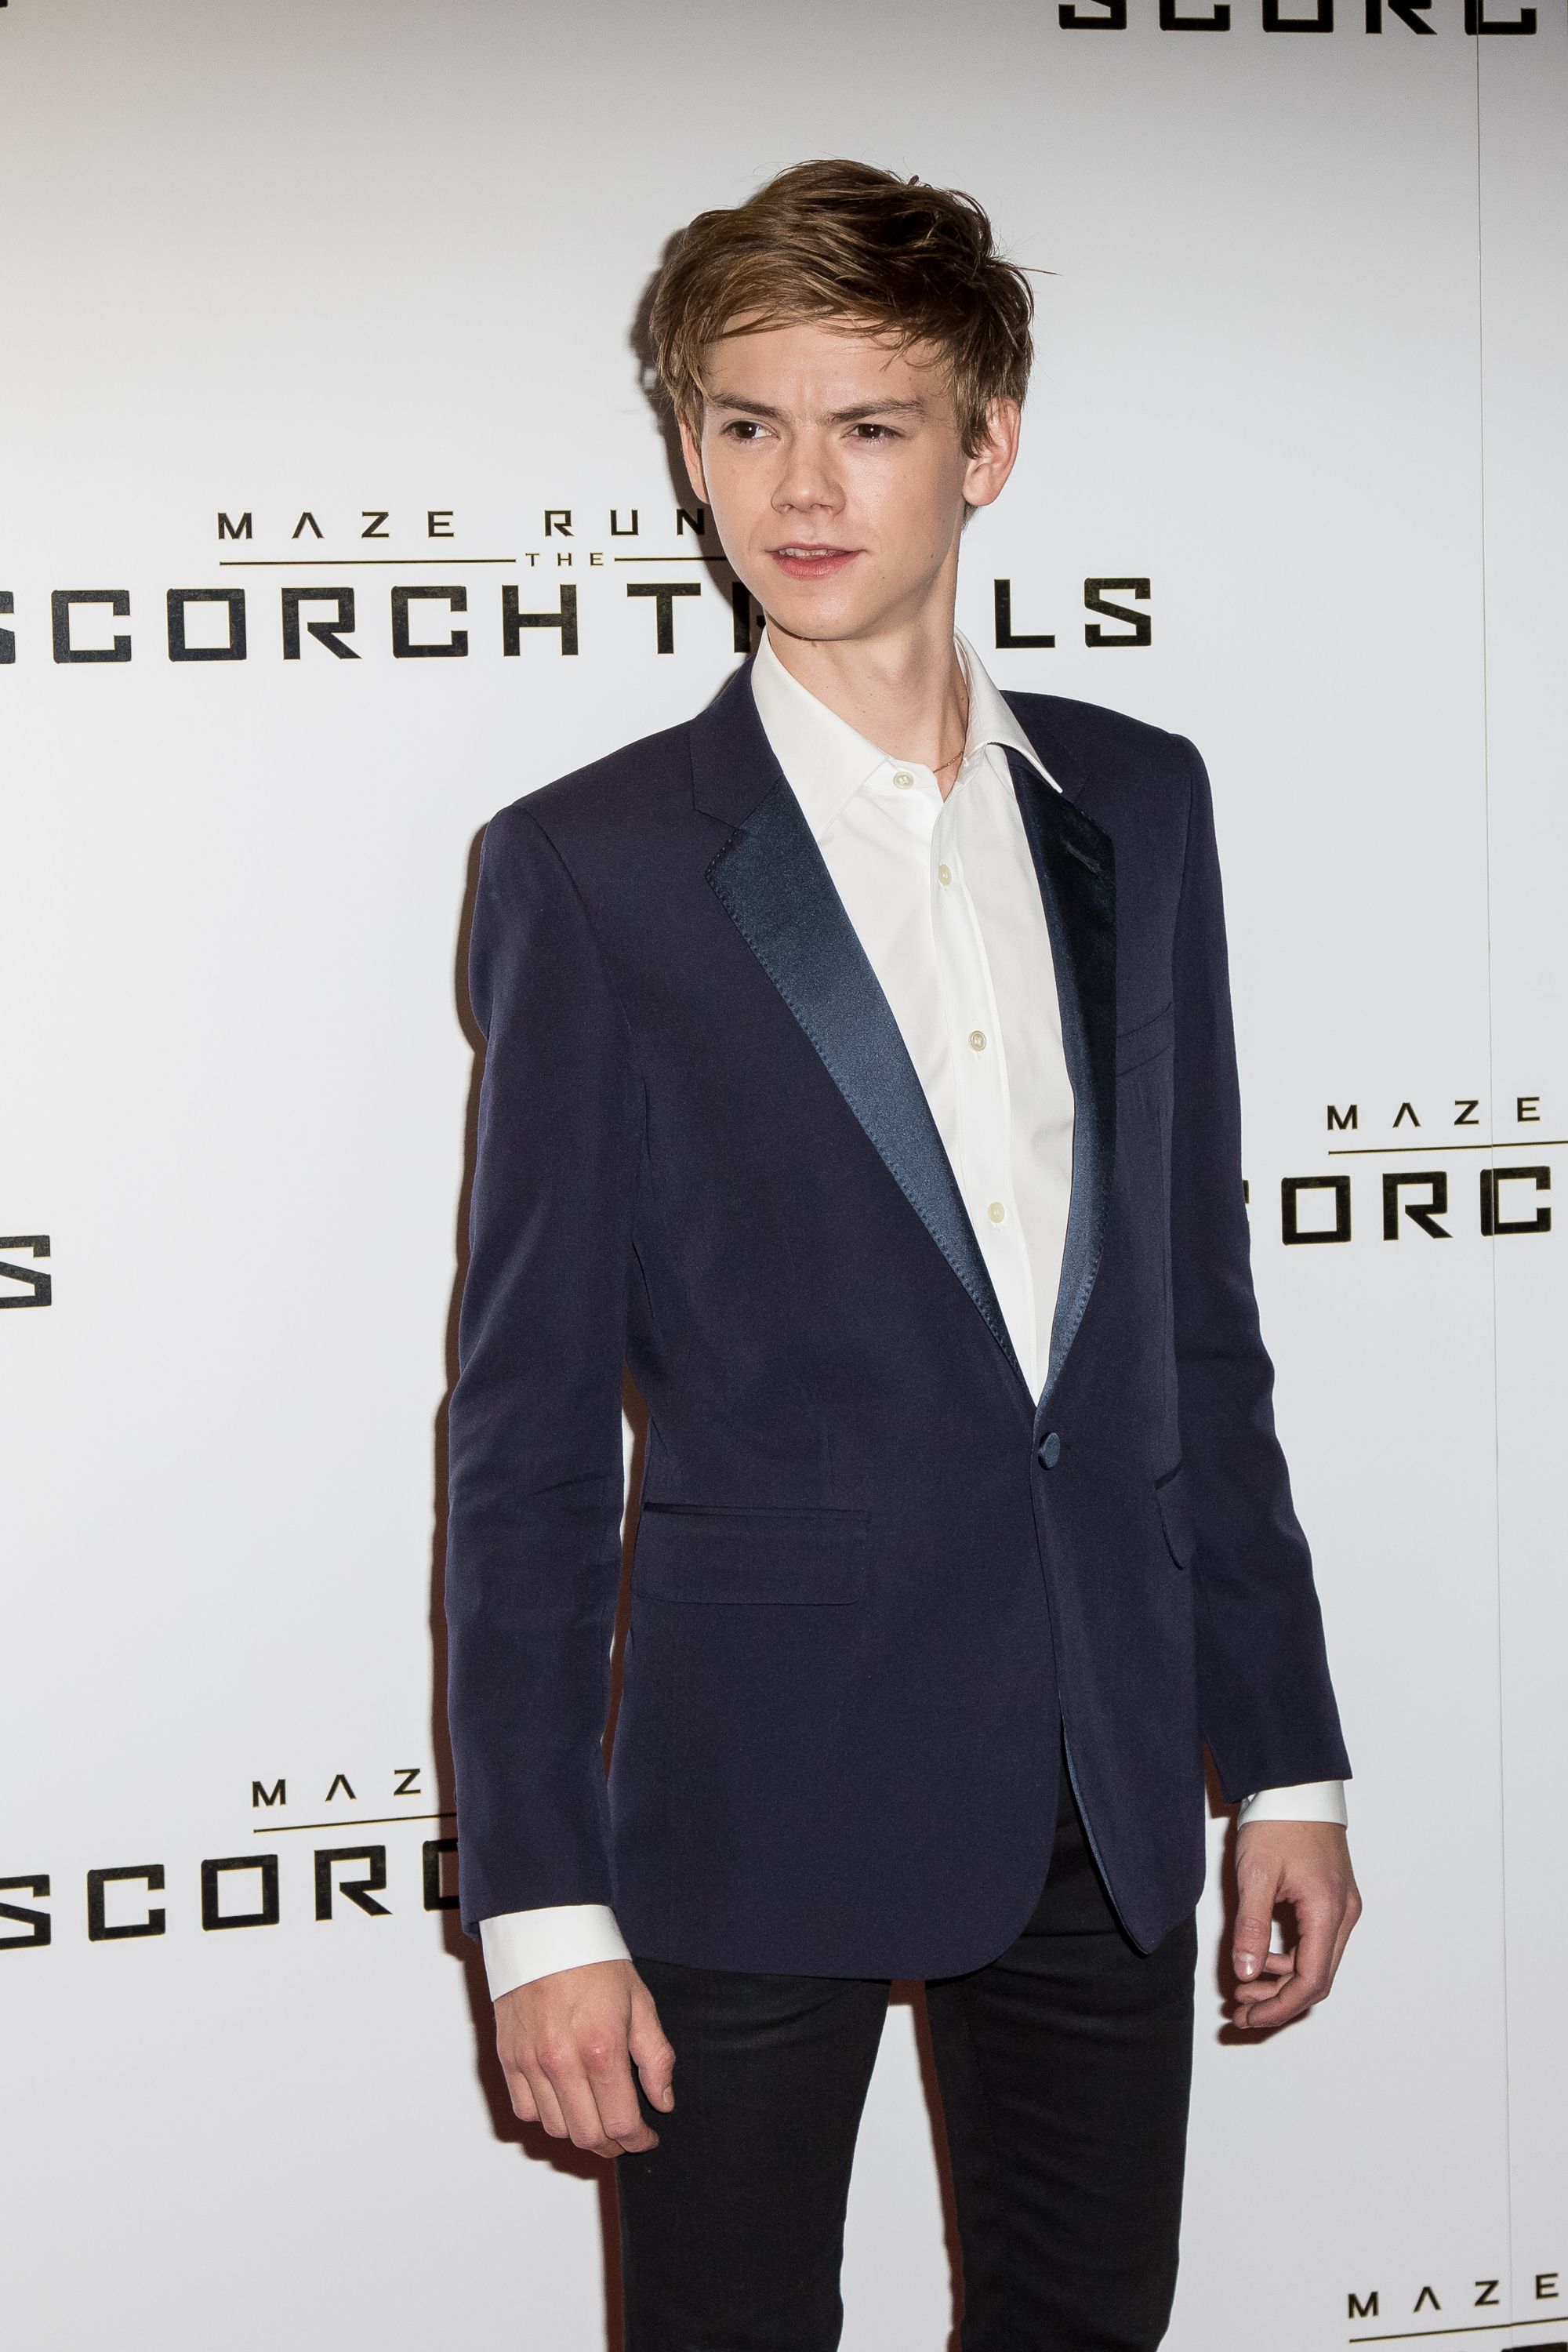 AwardsWatch - Interview: Thomas Brodie-Sangster on playing chess